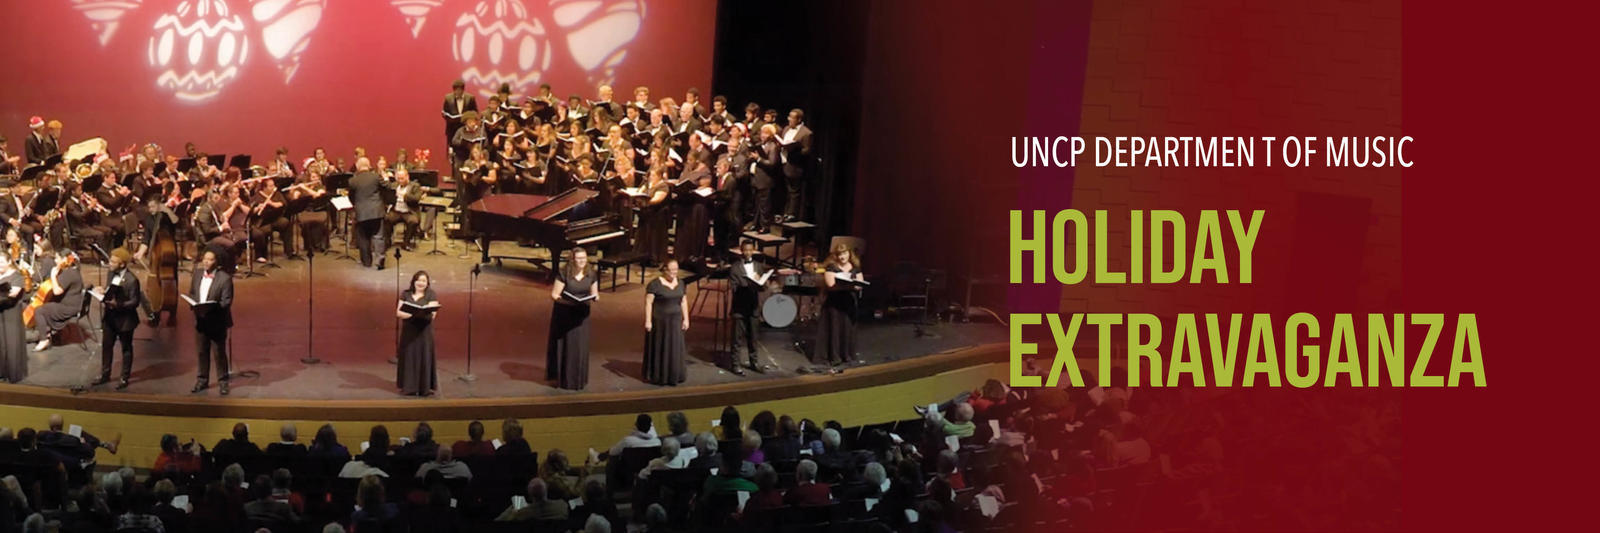 UNCP Department of Music Holiday Extravaganza